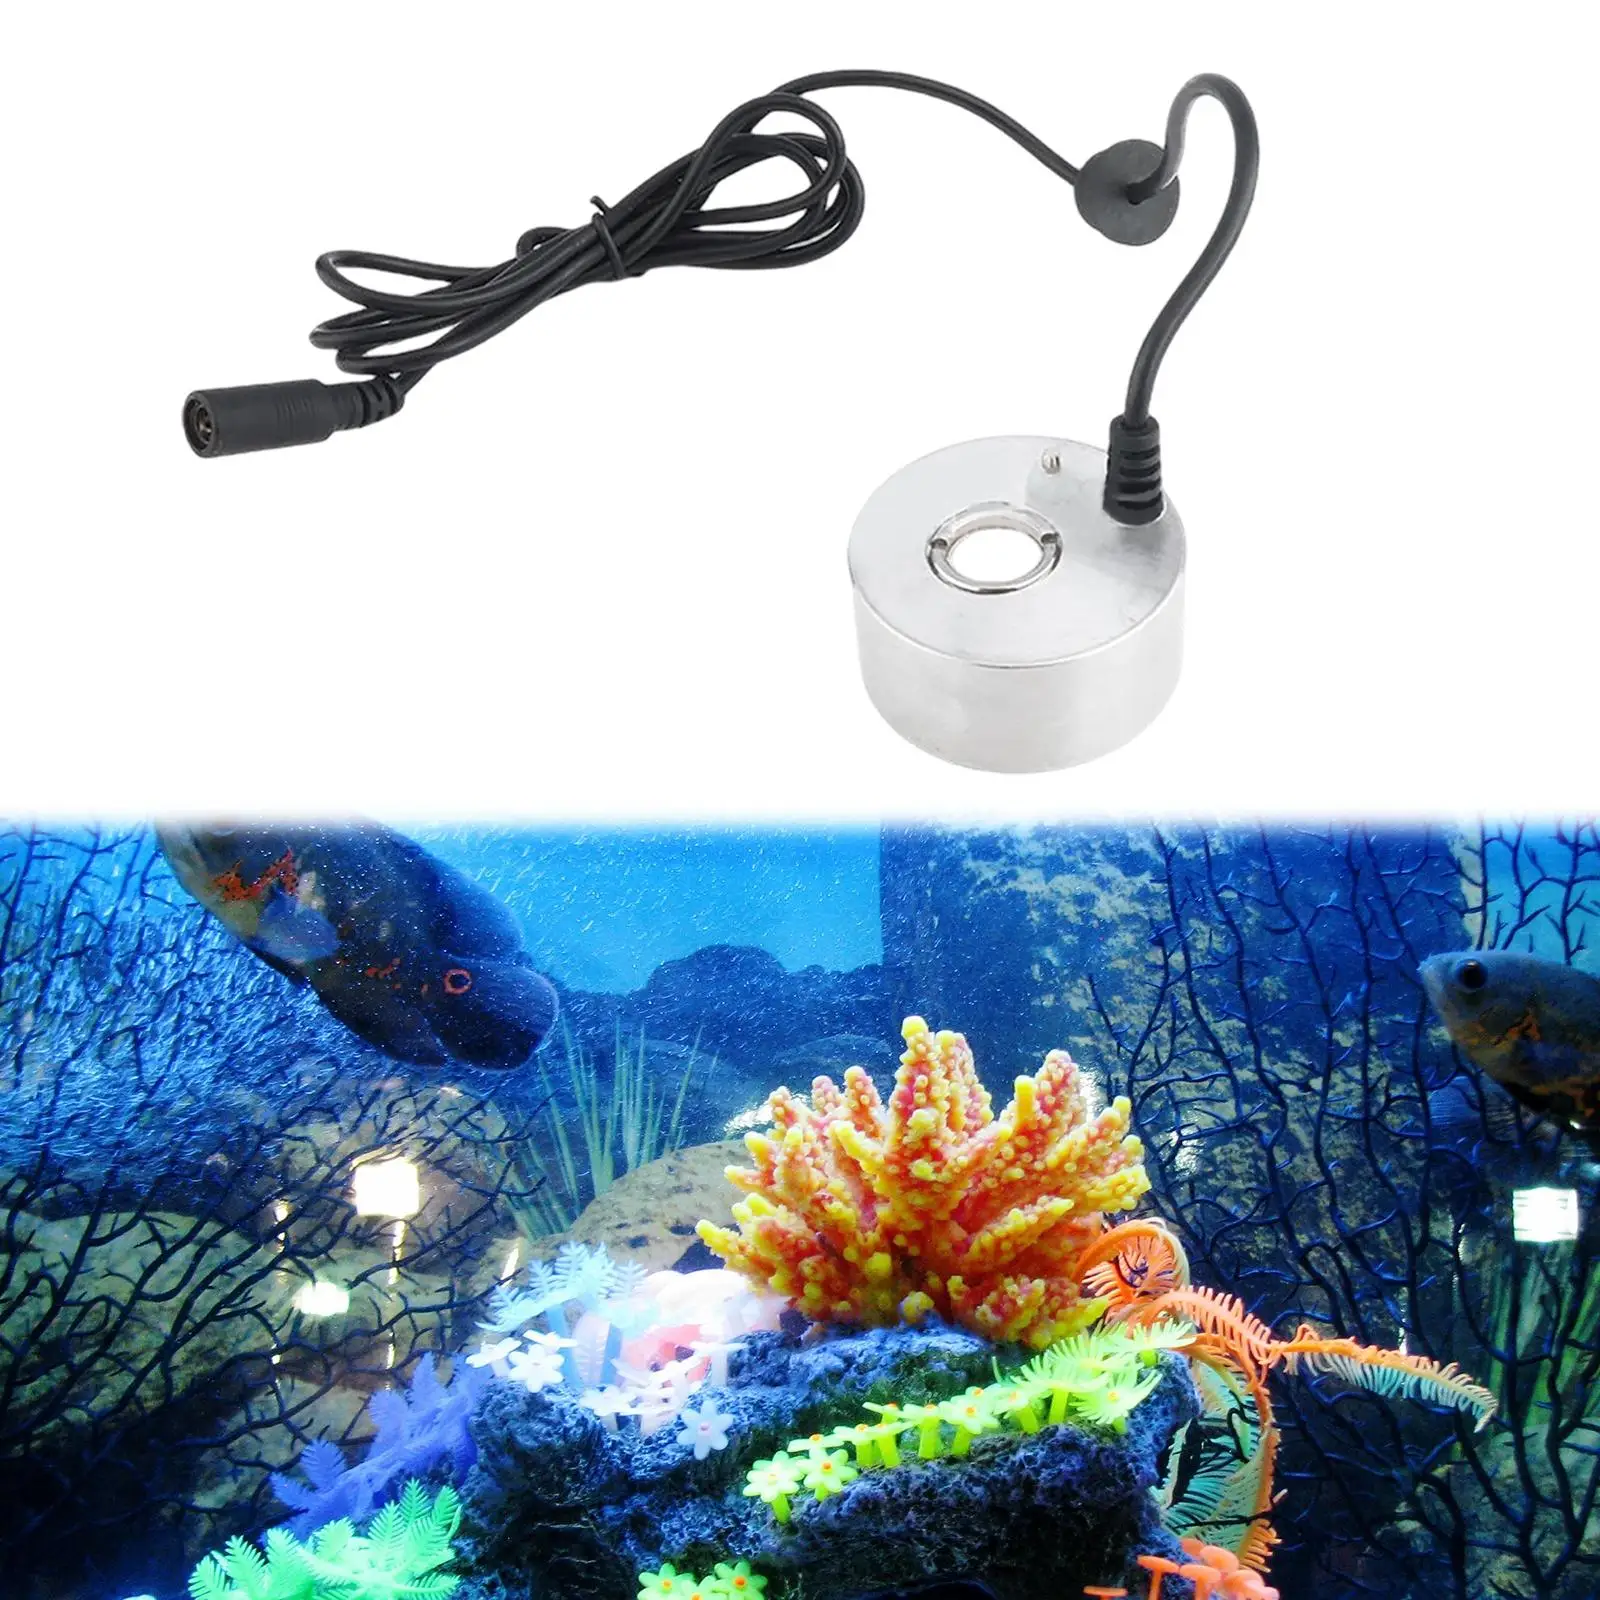 24V Ultrasonic Mist Maker Air Humidifier Water Fountain Atomizer Fogger for Rockery Fish Tank, Indoor Christmas Party Decor